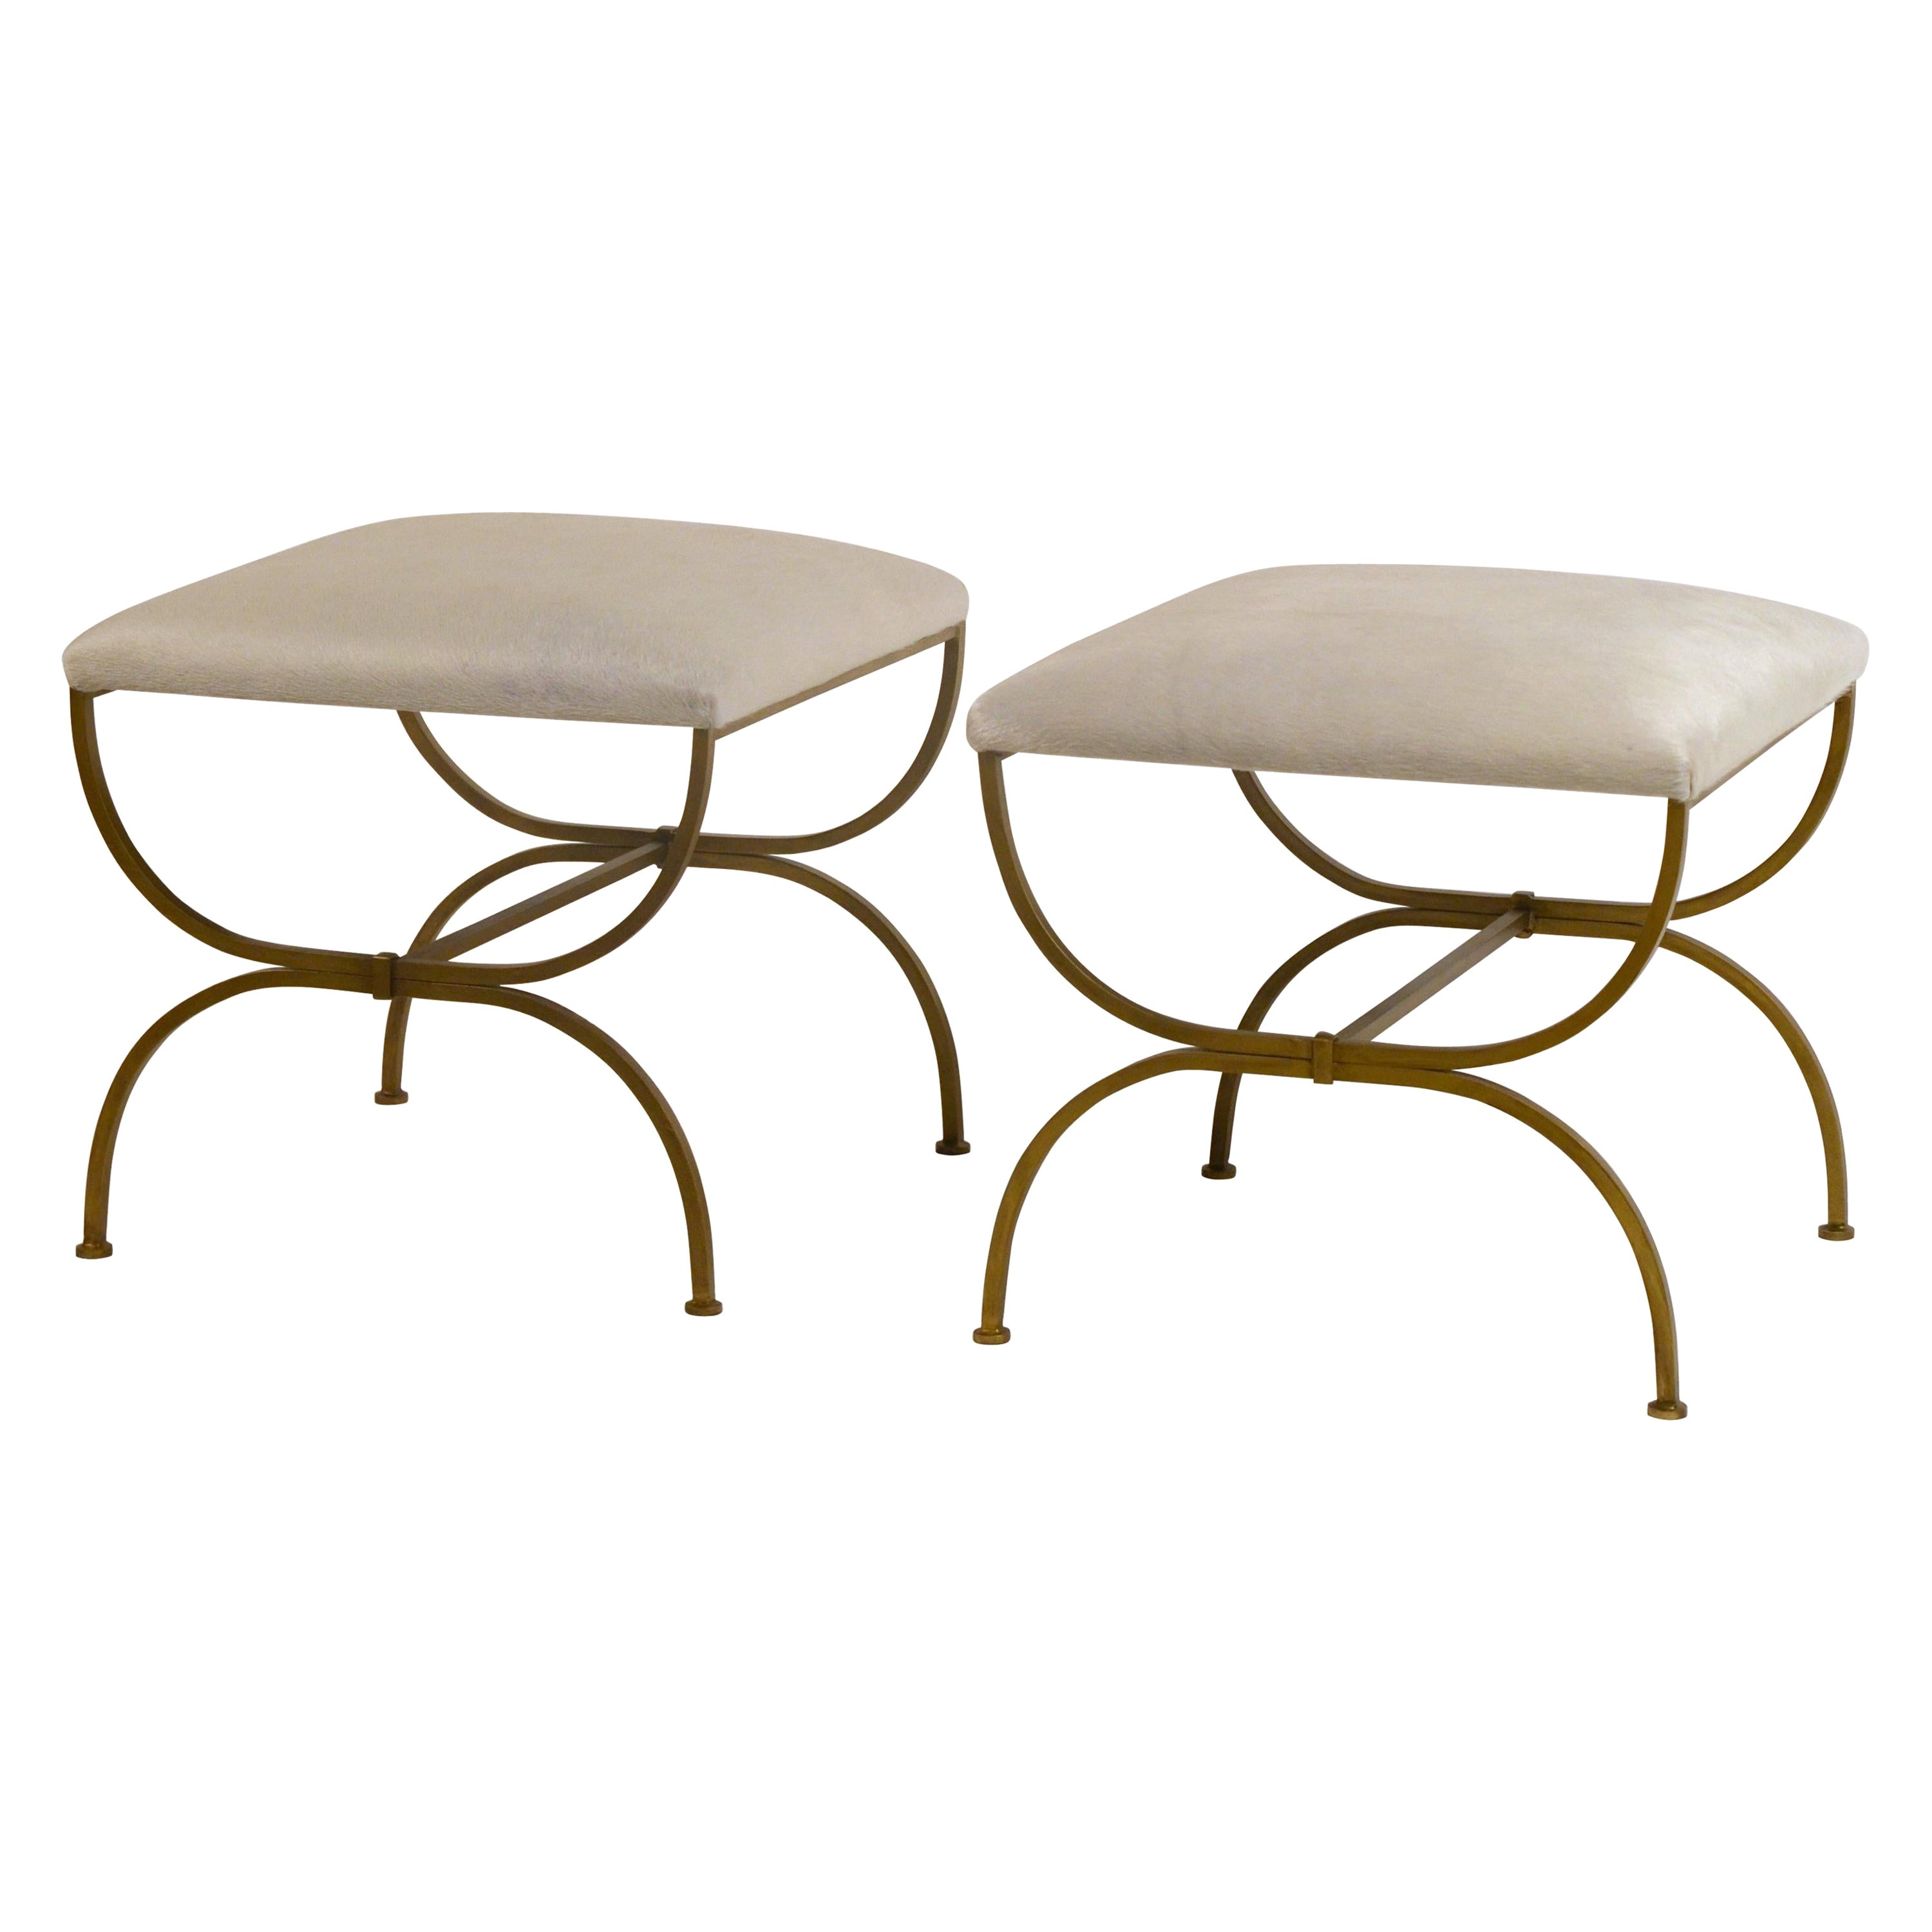 Pair of Large 'Strapontin' White Hide Stools by Design Frères